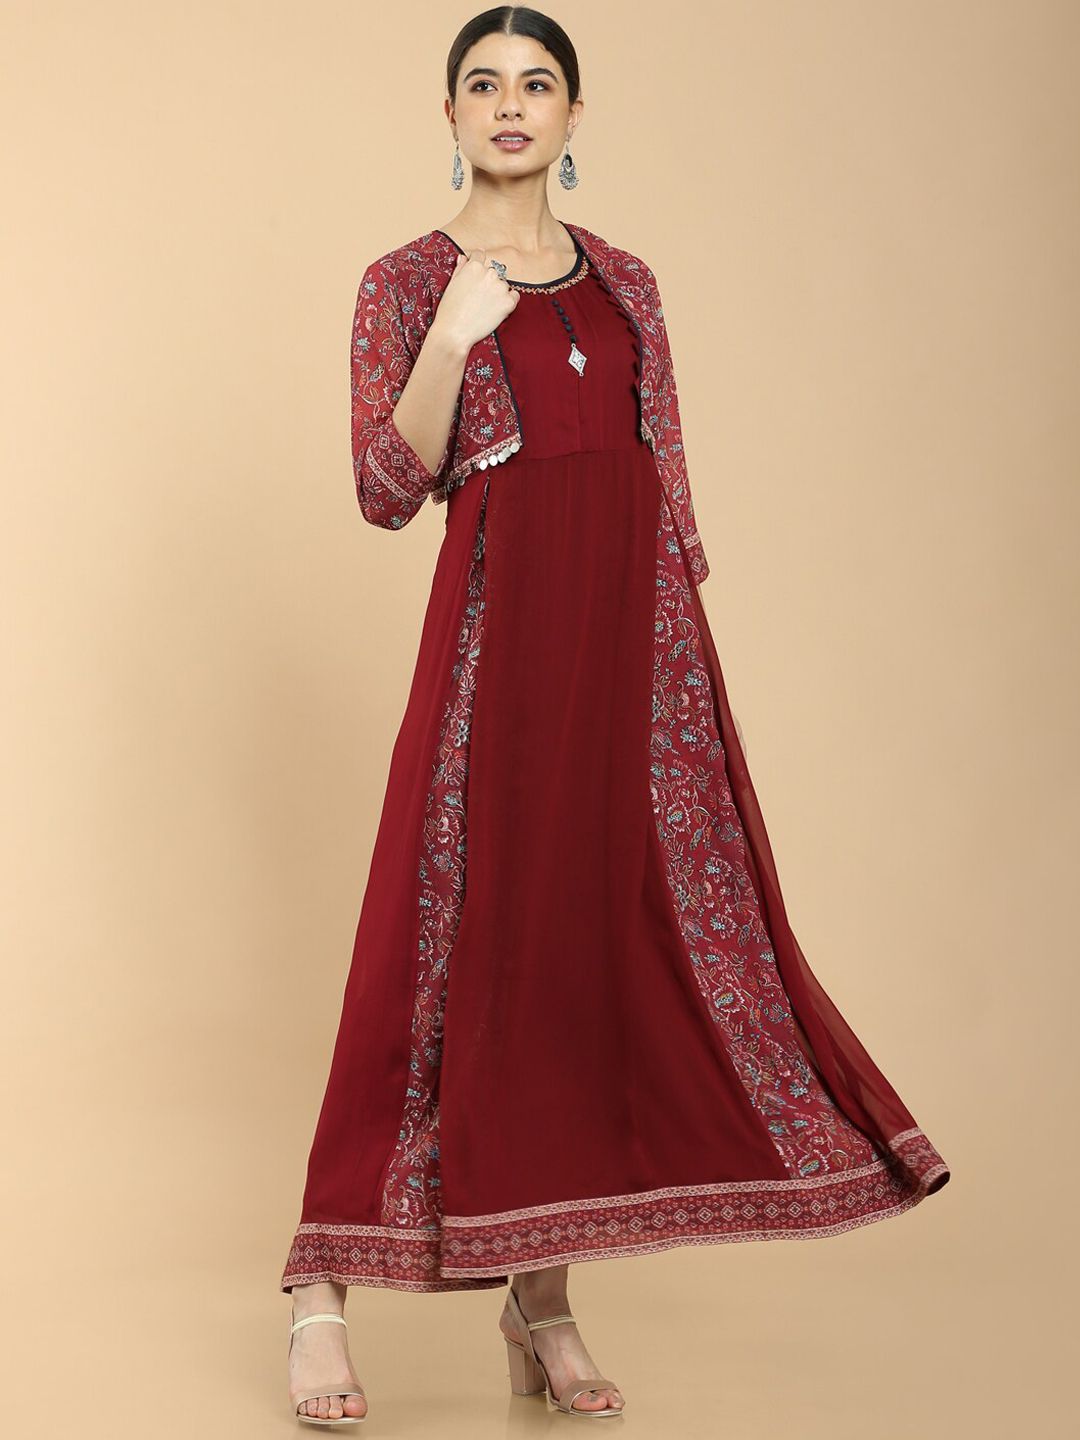 Soch Maroon Floral Printed Georgette Layered Ethnic Maxi Dress With Jacket Price in India